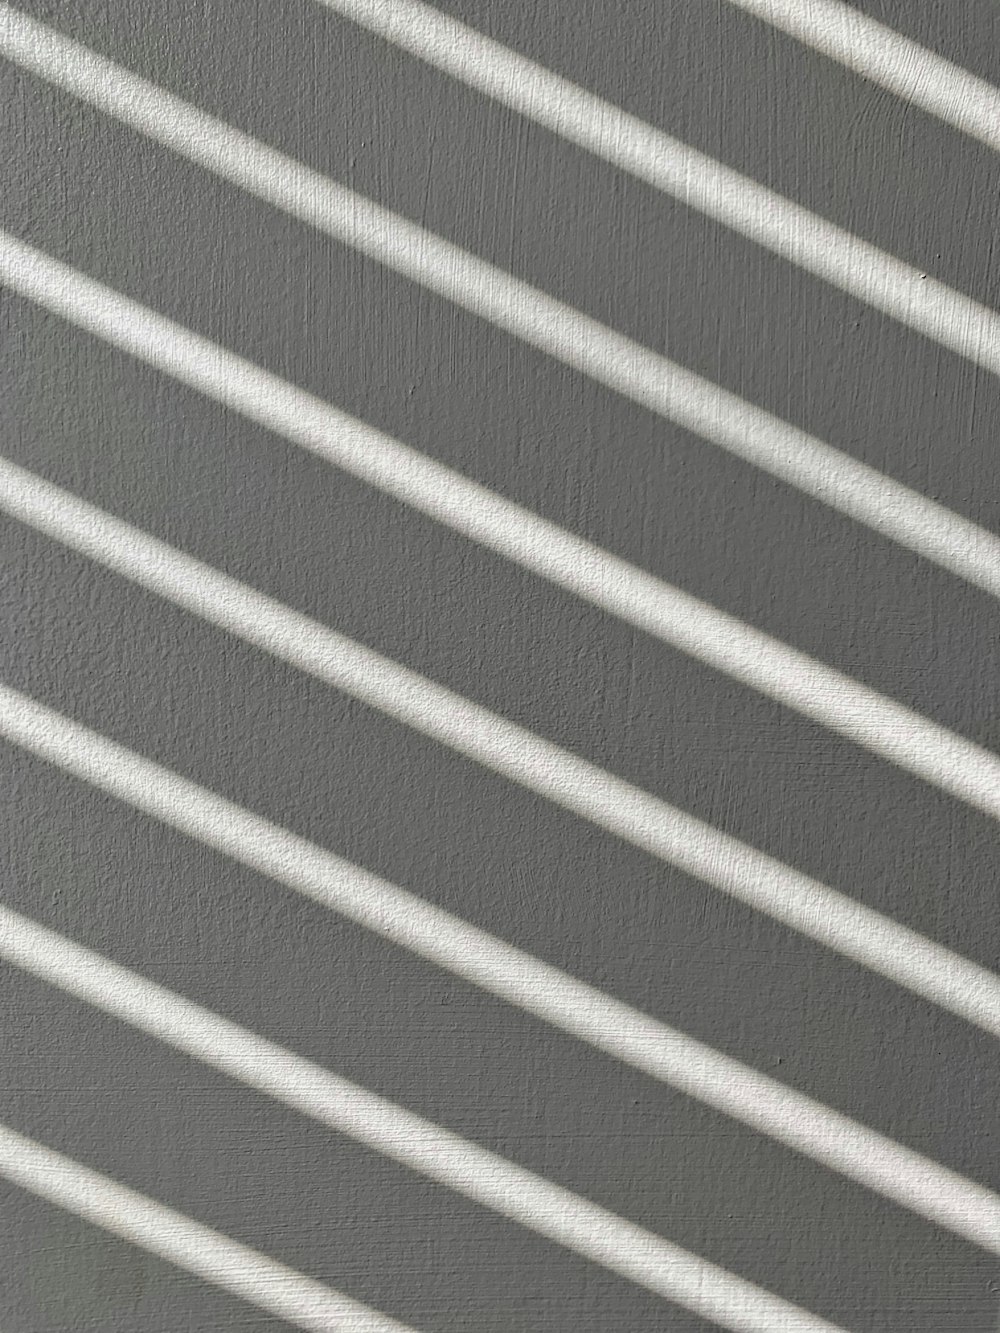 white and grey striped textile